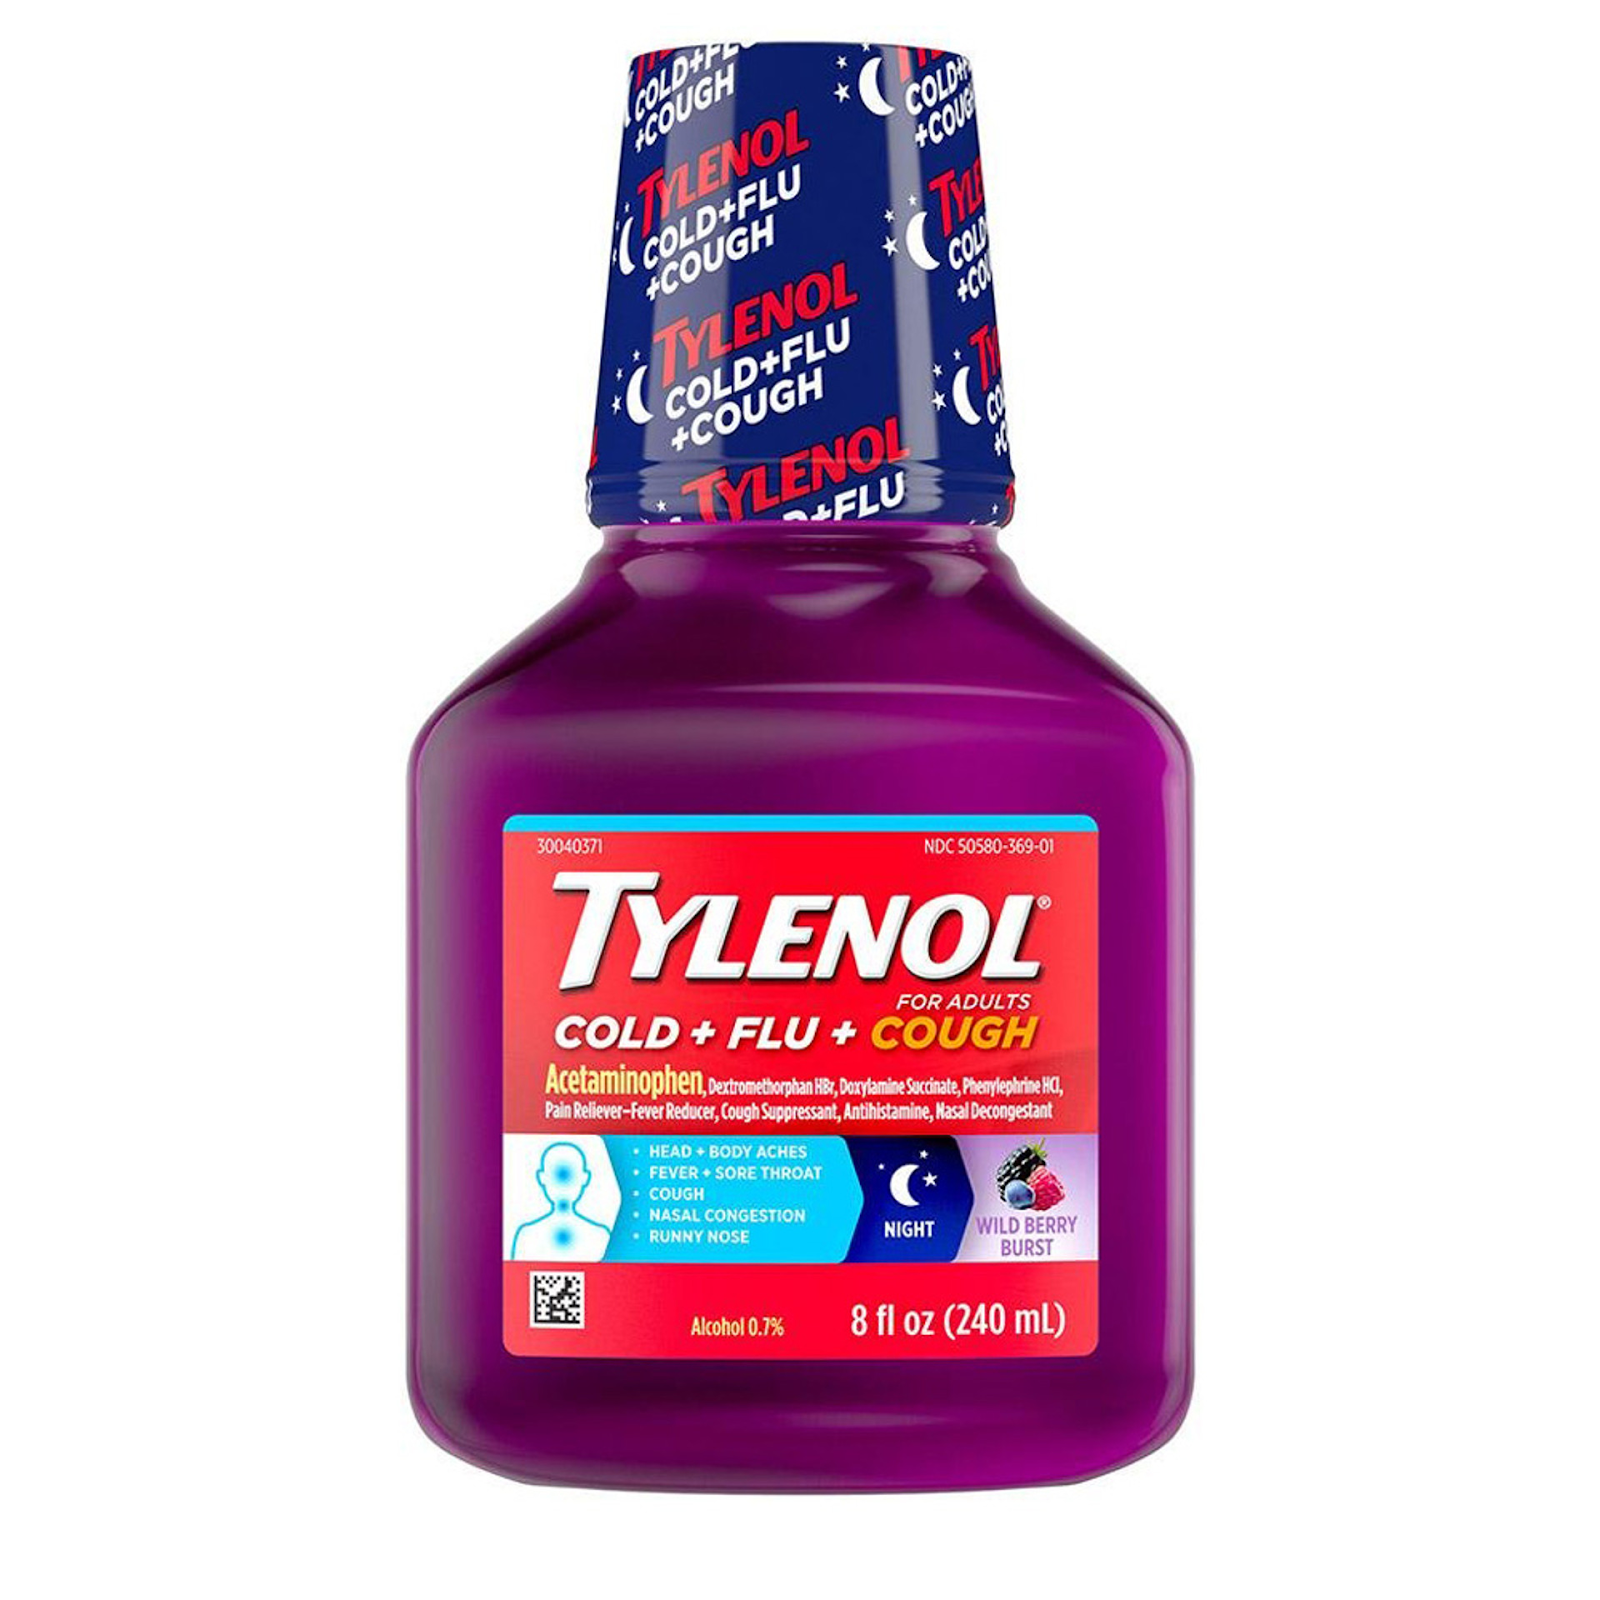 Tylenol Cold + Flu + Cough for Adults, Night Wild Berry Burst - 8 oz